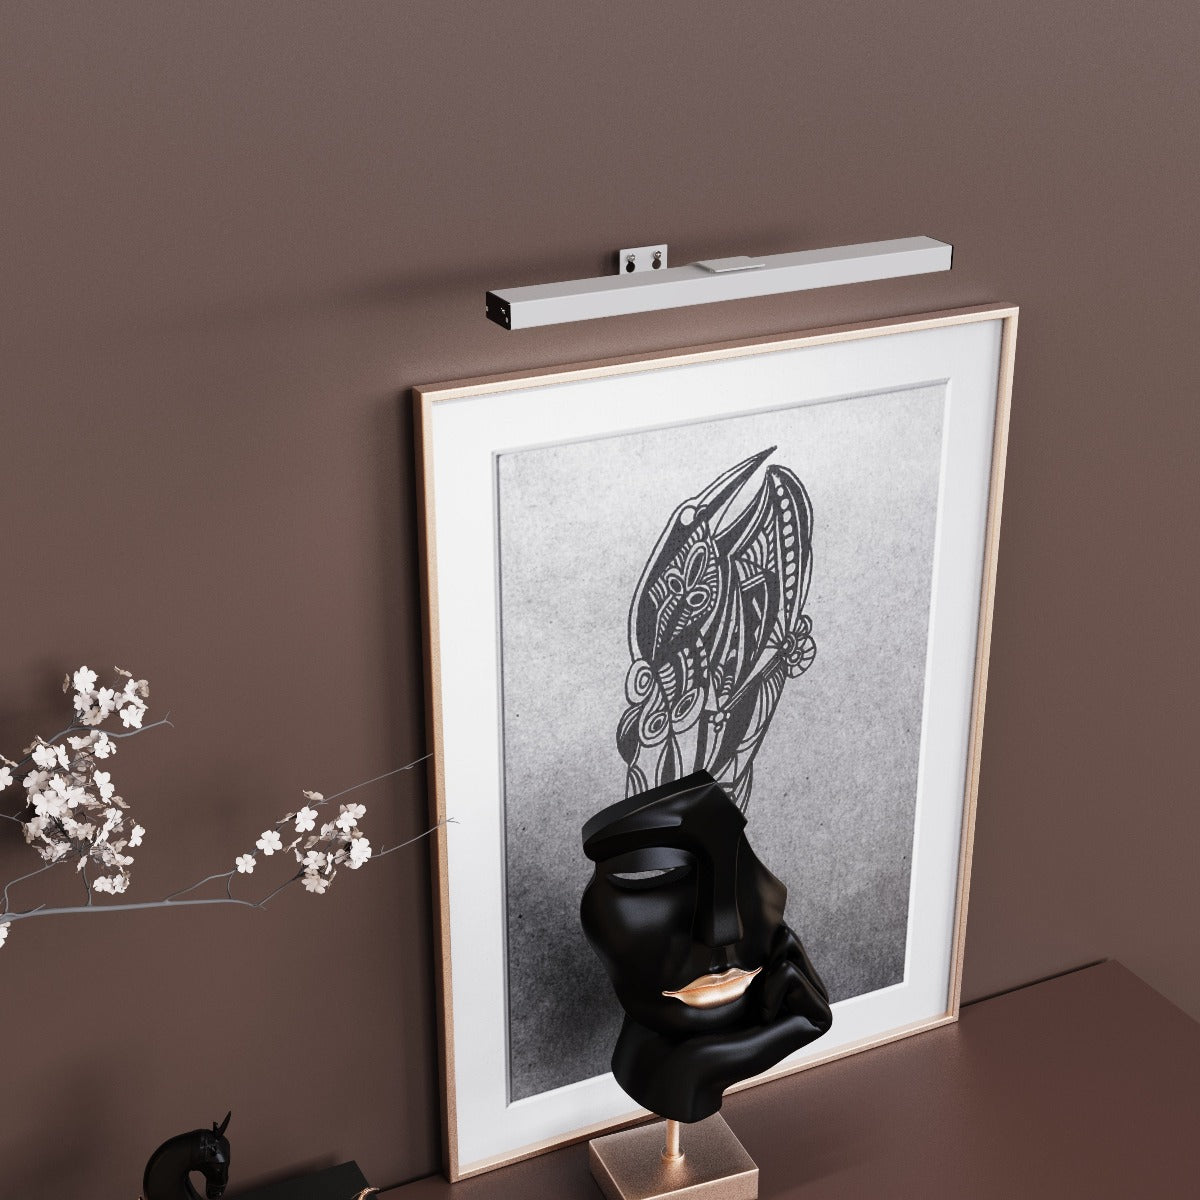 Libra's elegant and stylish finish makes it the ideal addition to any room. It will look perfect in both traditional and modern environments. The beauty of this wall light means you can install it on any wall without the requirement of expensive electrician fees and mains installation.